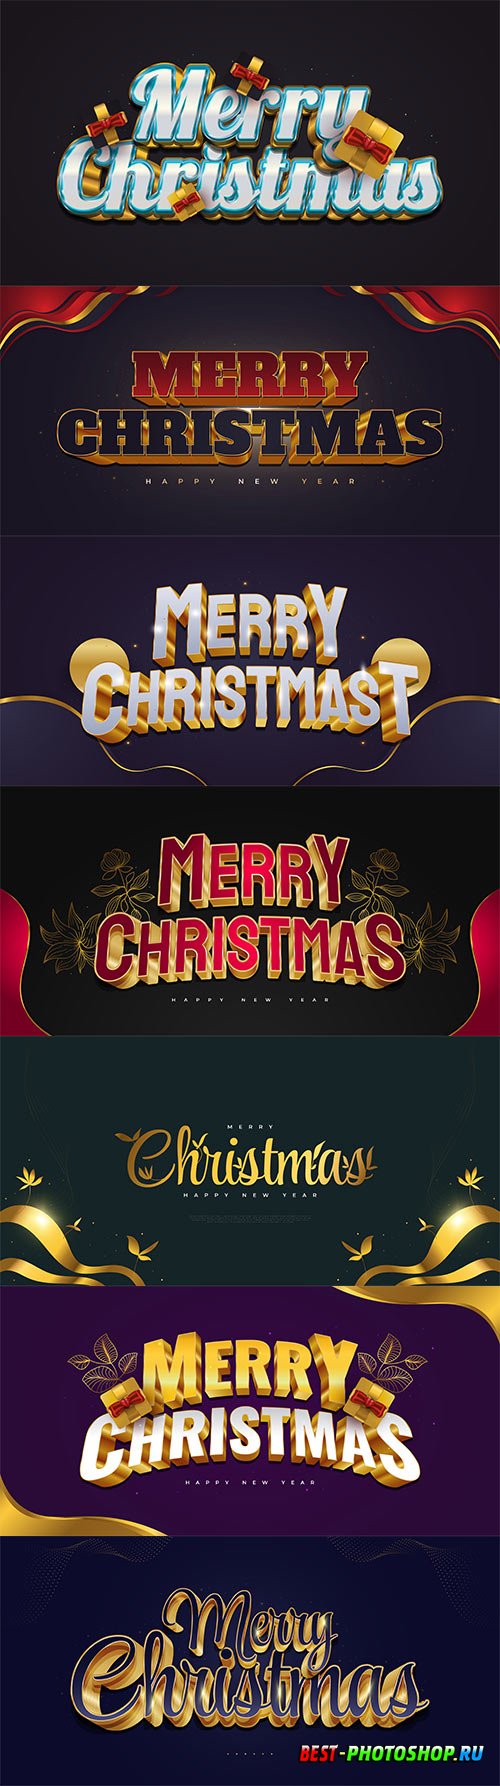 Merry christmas and happy new year 2022 editable vector text effects vol 17